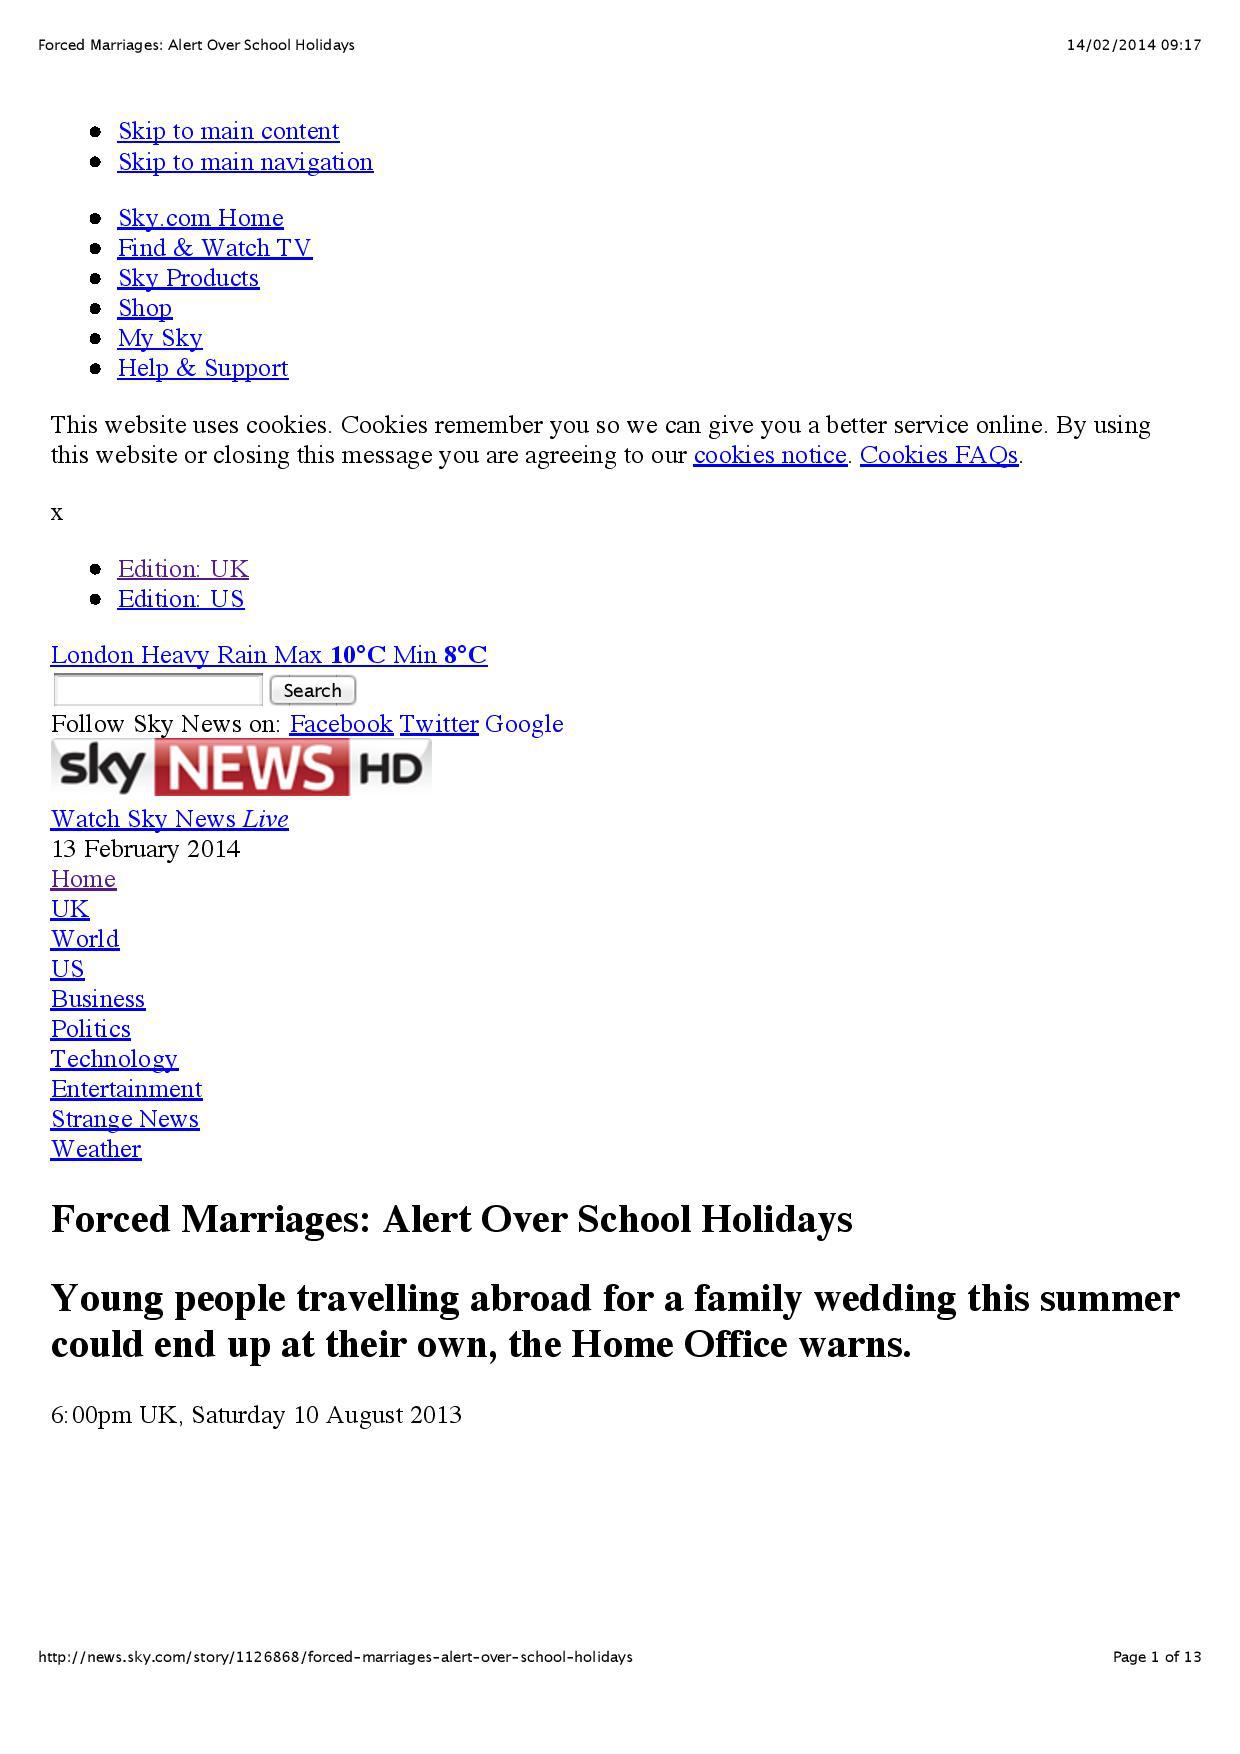 done-sky-forced-marriages-alert-over-school-holidays-page-001